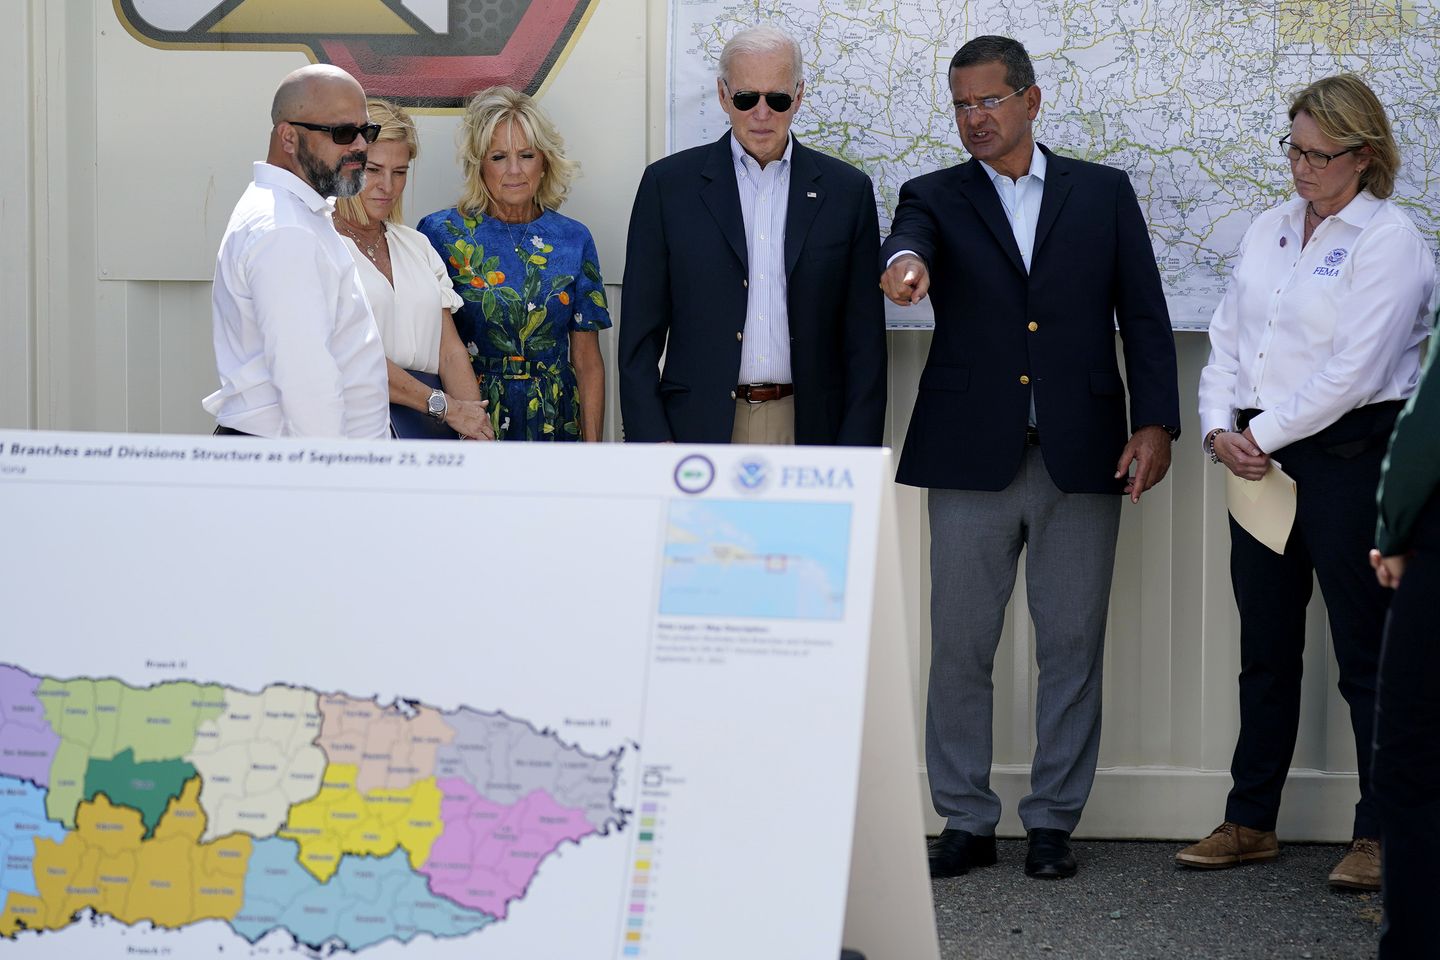 Touring hurricane damage, Biden claims he was 'raised' by Delaware's Puerto Rican community